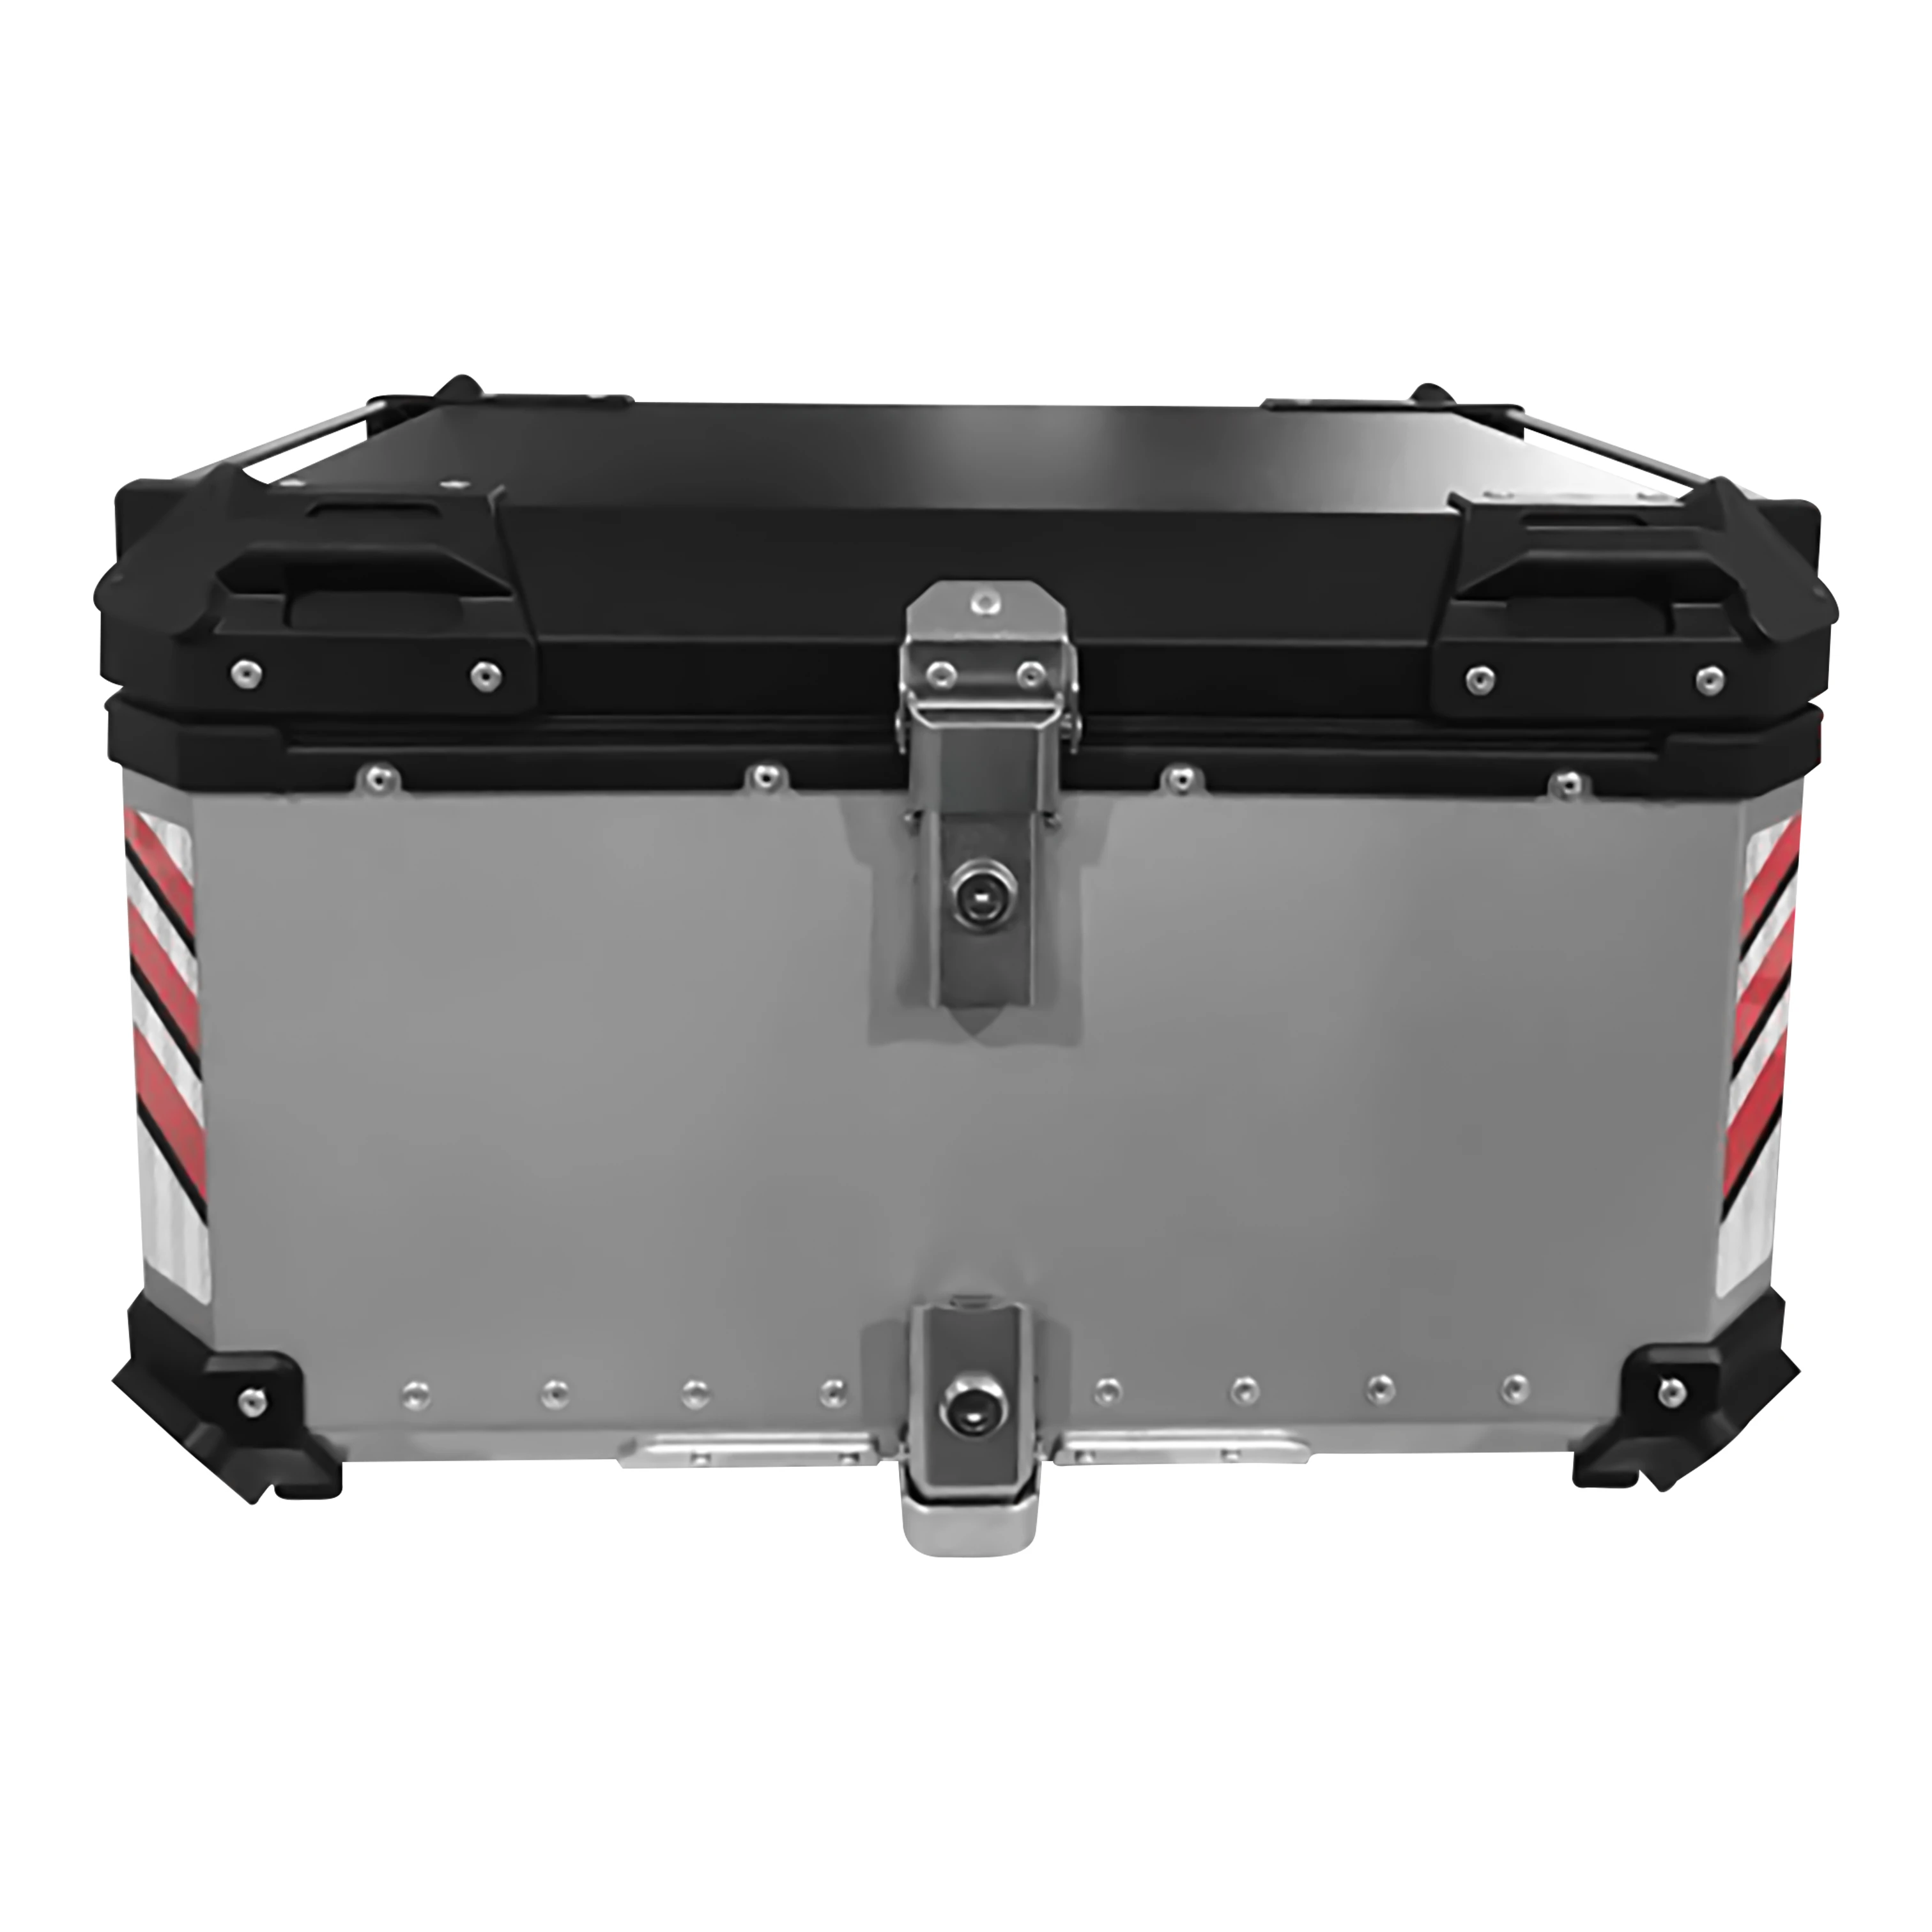 ZHUITU 80L Motorcycle Tail Box delivery case aluminum box scooter motocross accessory luggage lock top box